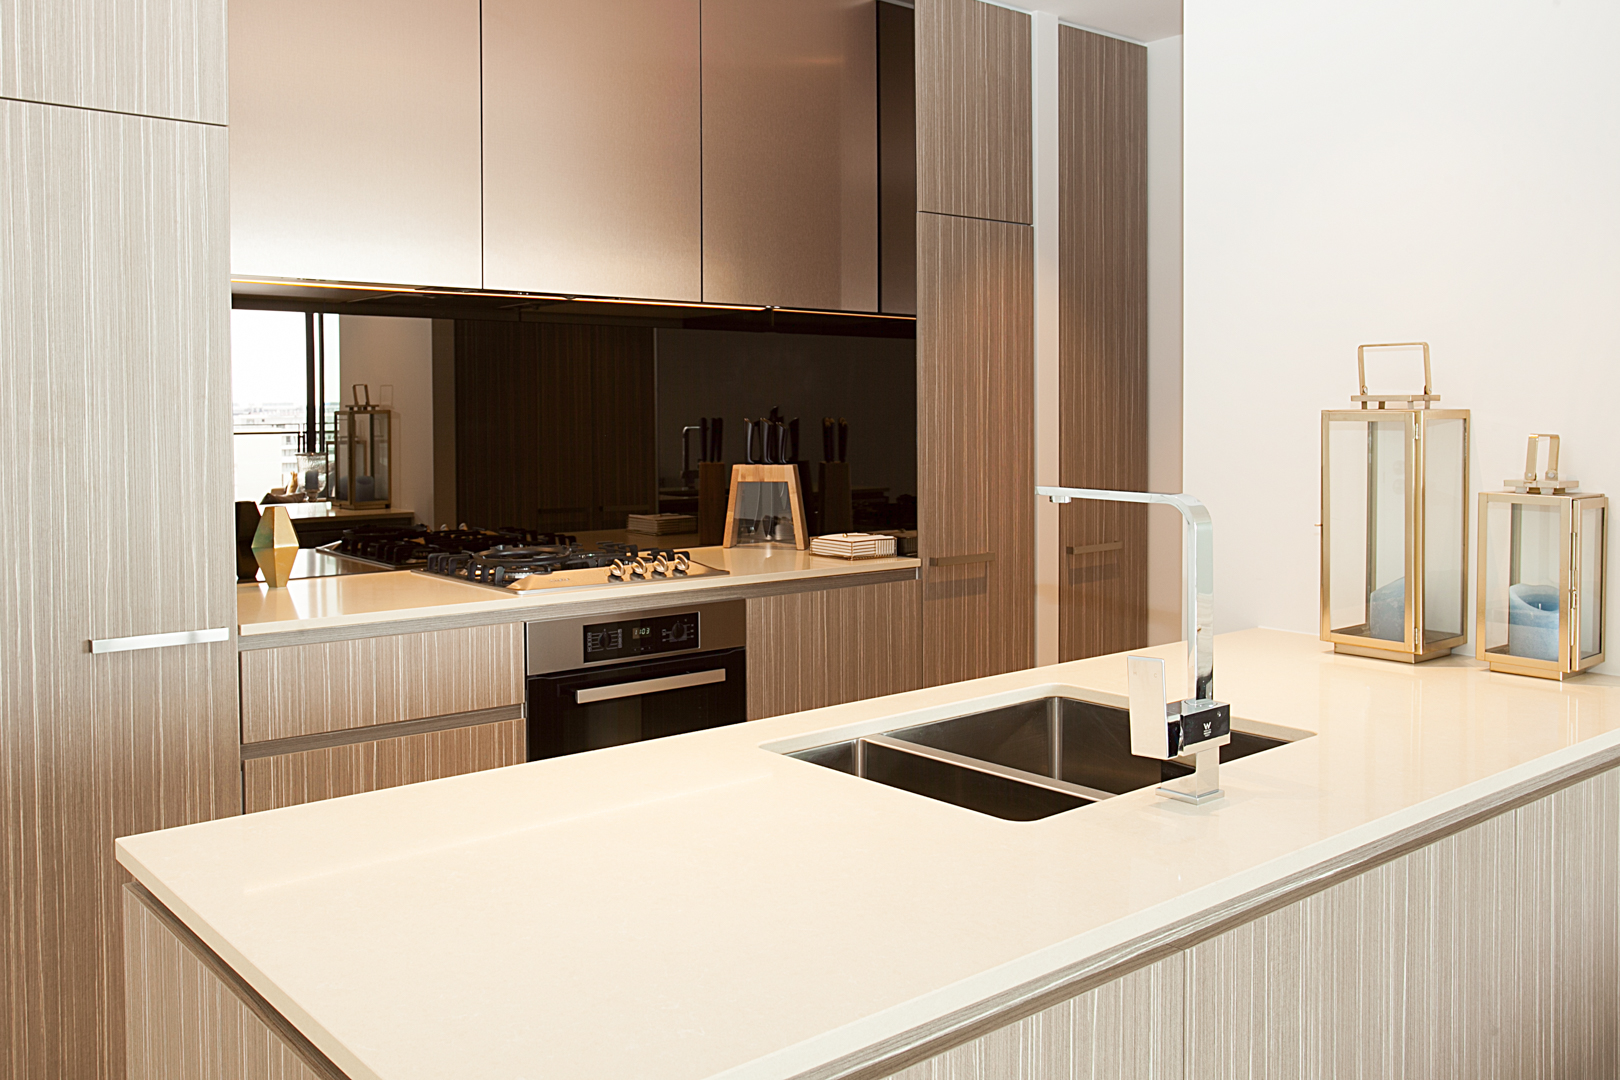 Kitchen Benchtop - Two Bedroom Apartment - Urban Rest - The Infinity Apartments - Sydney